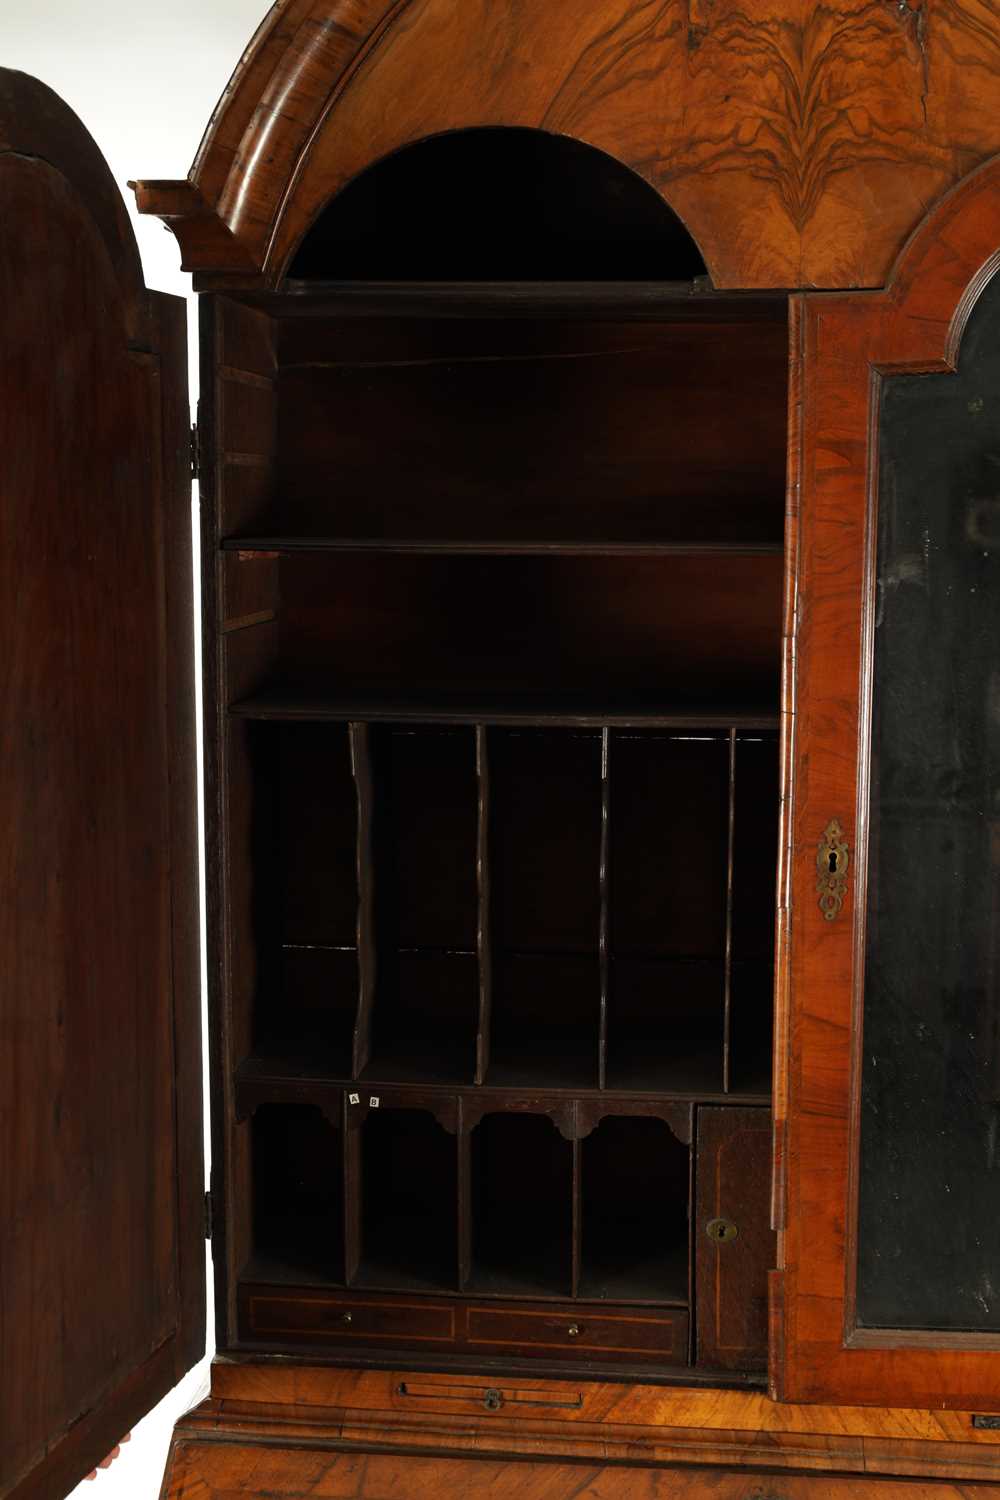 AN EARLY 18TH CENTURY FIGURED WALNUT AND OAK BREAK ARCHED TOP BUREAU BOOKCASE - Image 8 of 10